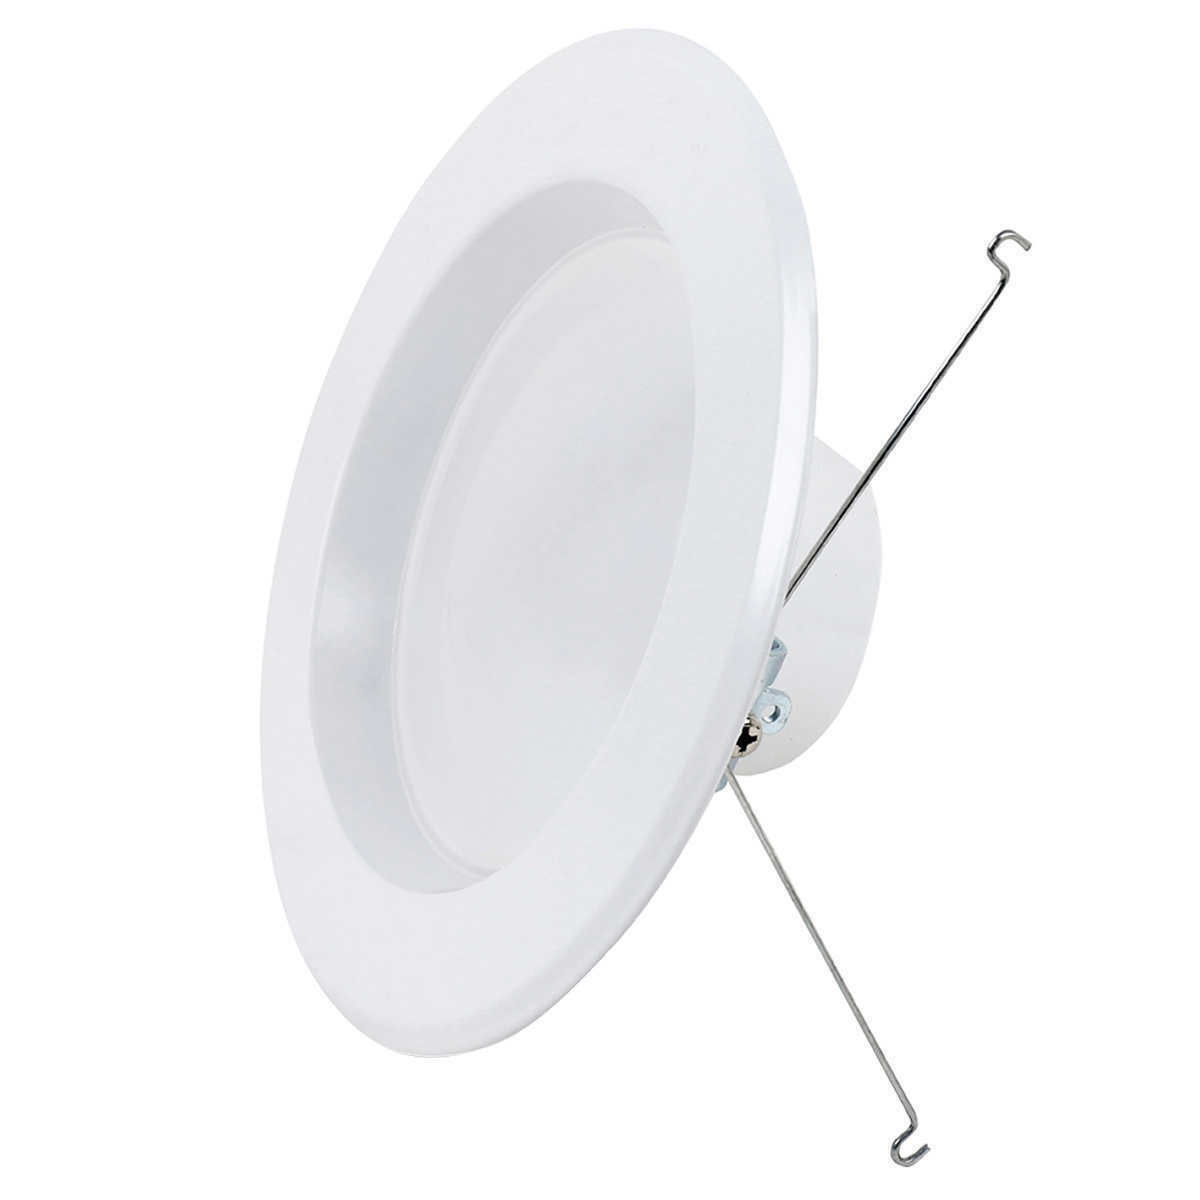 Feit Electric 5/6 in Recessed LED Downlights - Set of 4 - CELEDR6/927/2 - $14.84